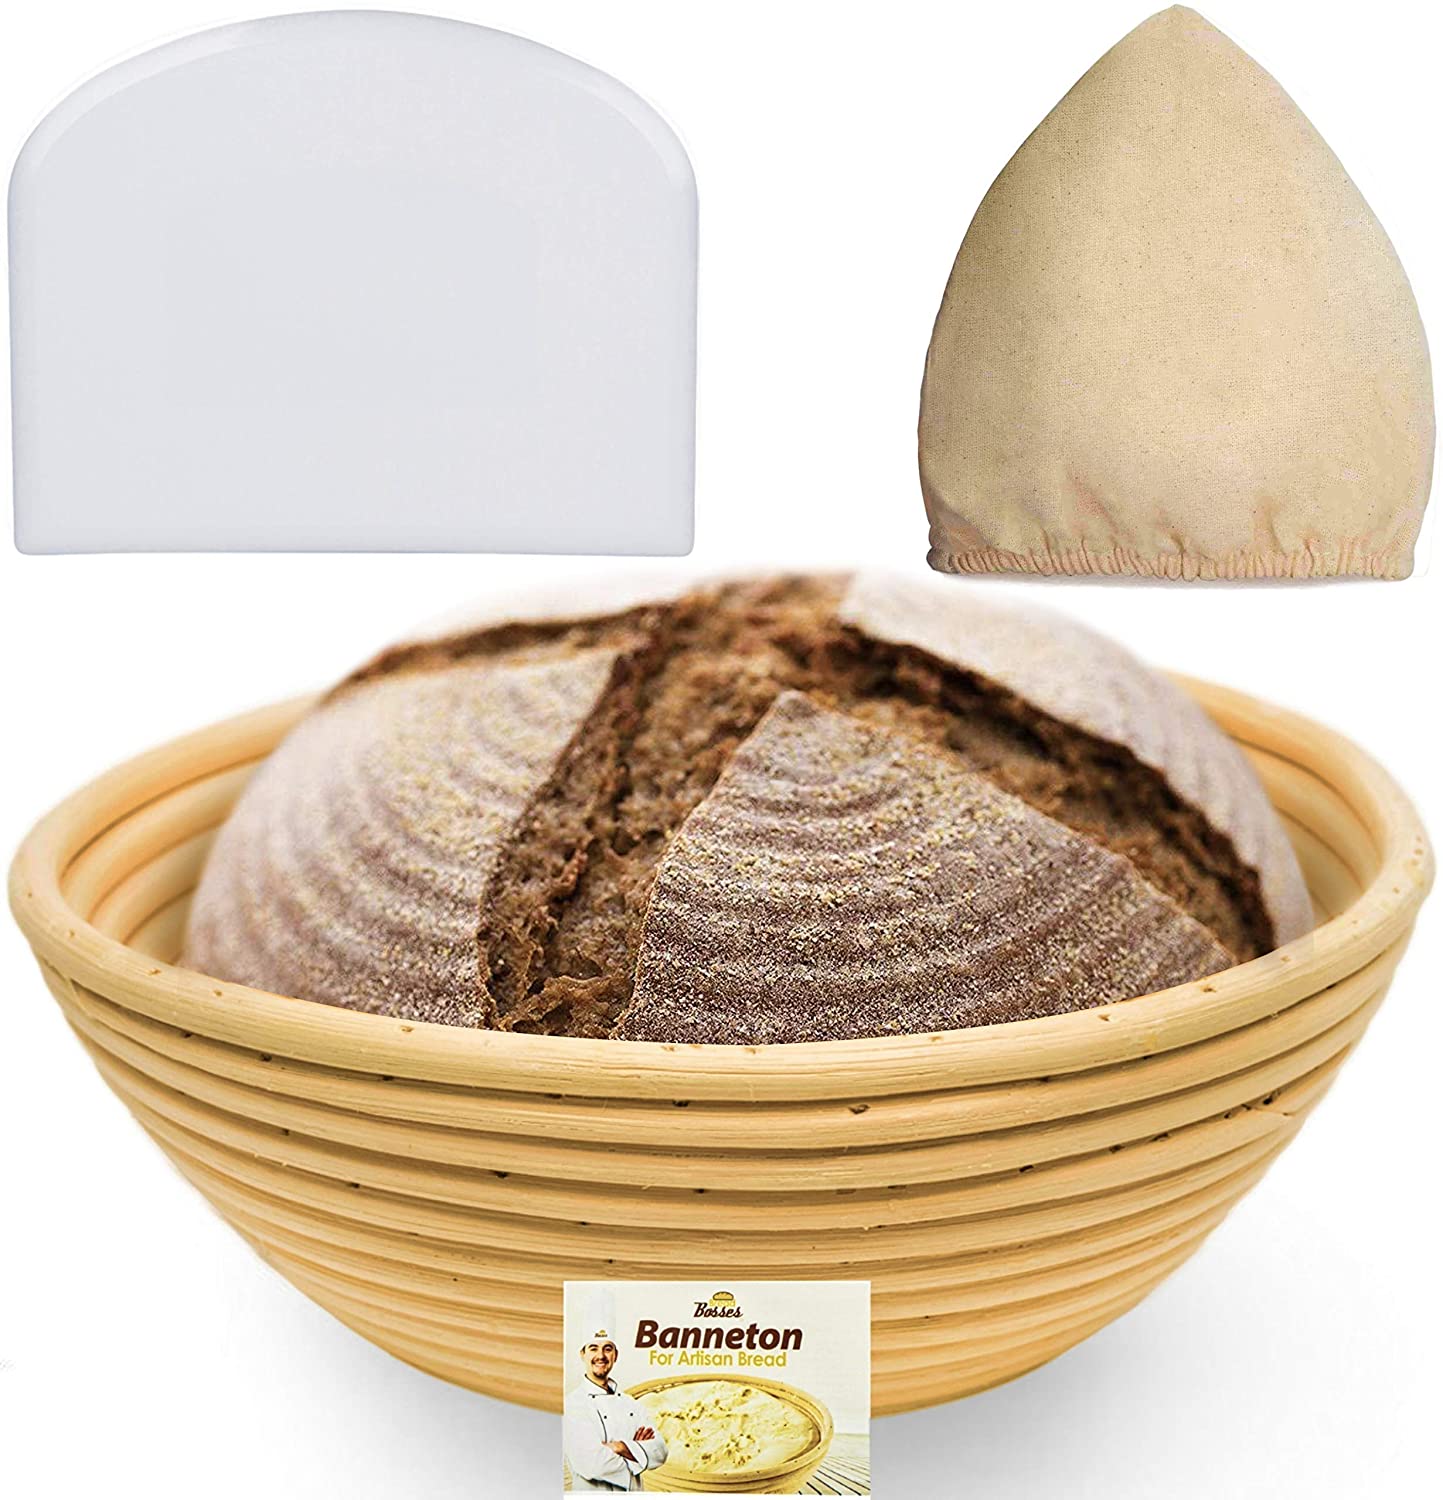 6 Pack 9 Inch Round Bread Proofing Basket Cloth Liner Sourdough Banneton Proofing Cloth Natural Rattan Baking Dough Basket Cover for Home Baking,Professional Baking Supplies